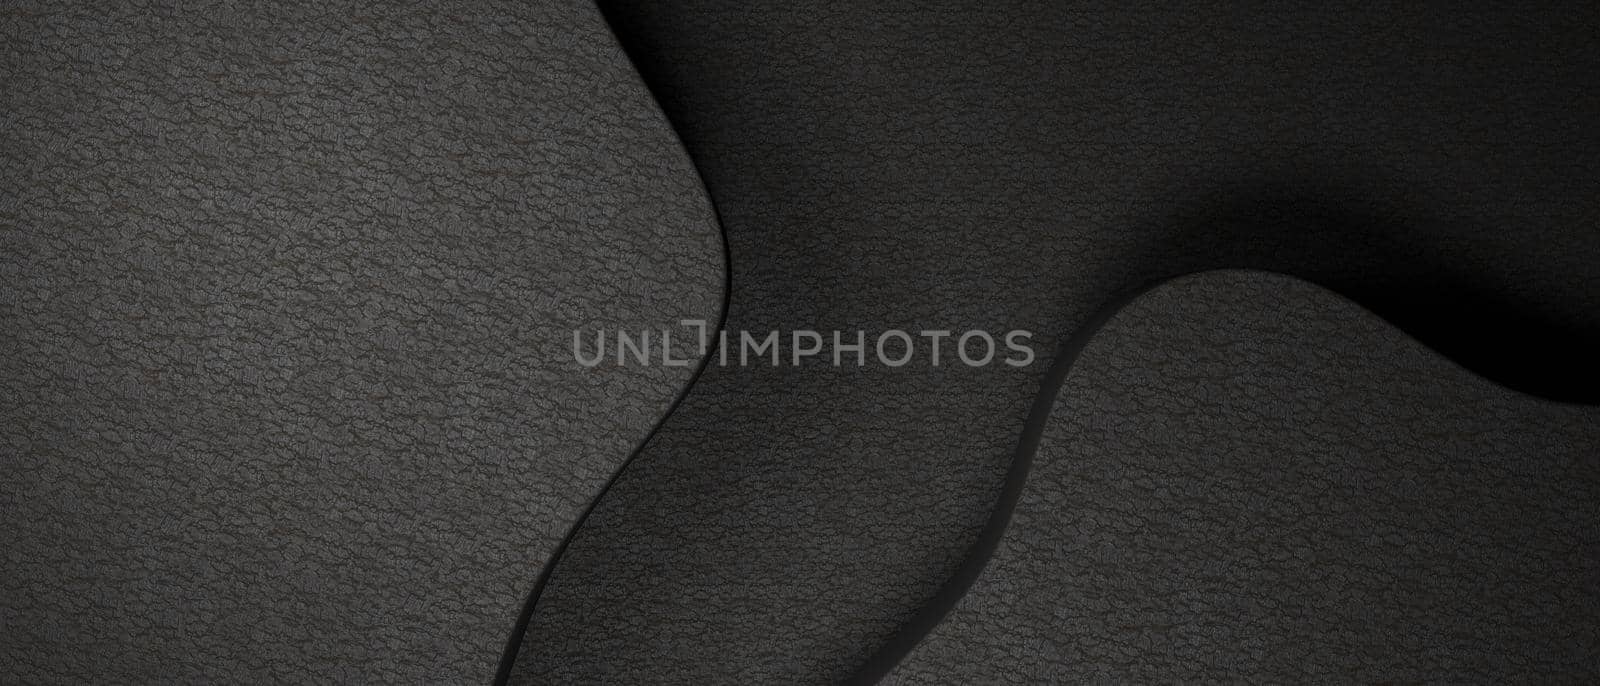 Abstract Dynamic Black Background rough texture. Usable for Background, Wallpaper, Banner, Poster, Brochure, Card, Web, Presentation. 3D Illustration Design Template.